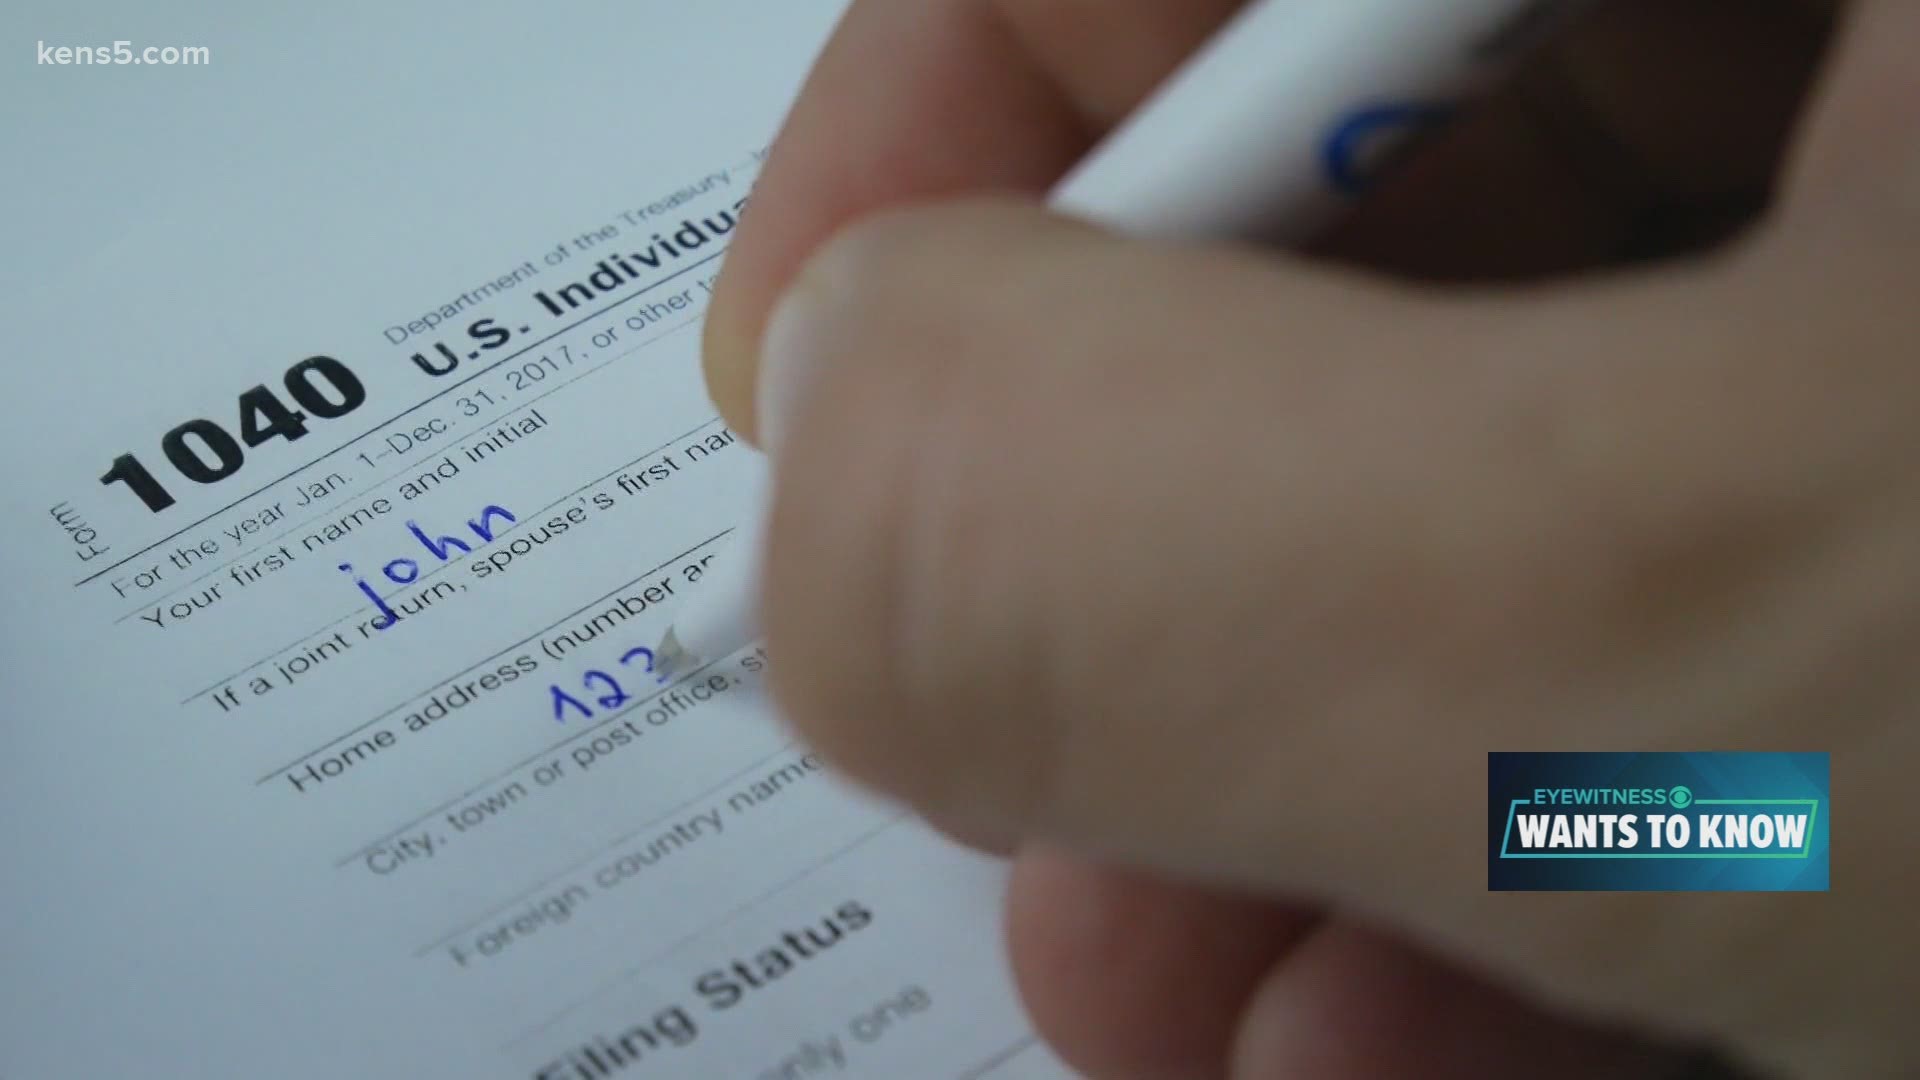 The tax code can be tough to figure out. We're here to help.